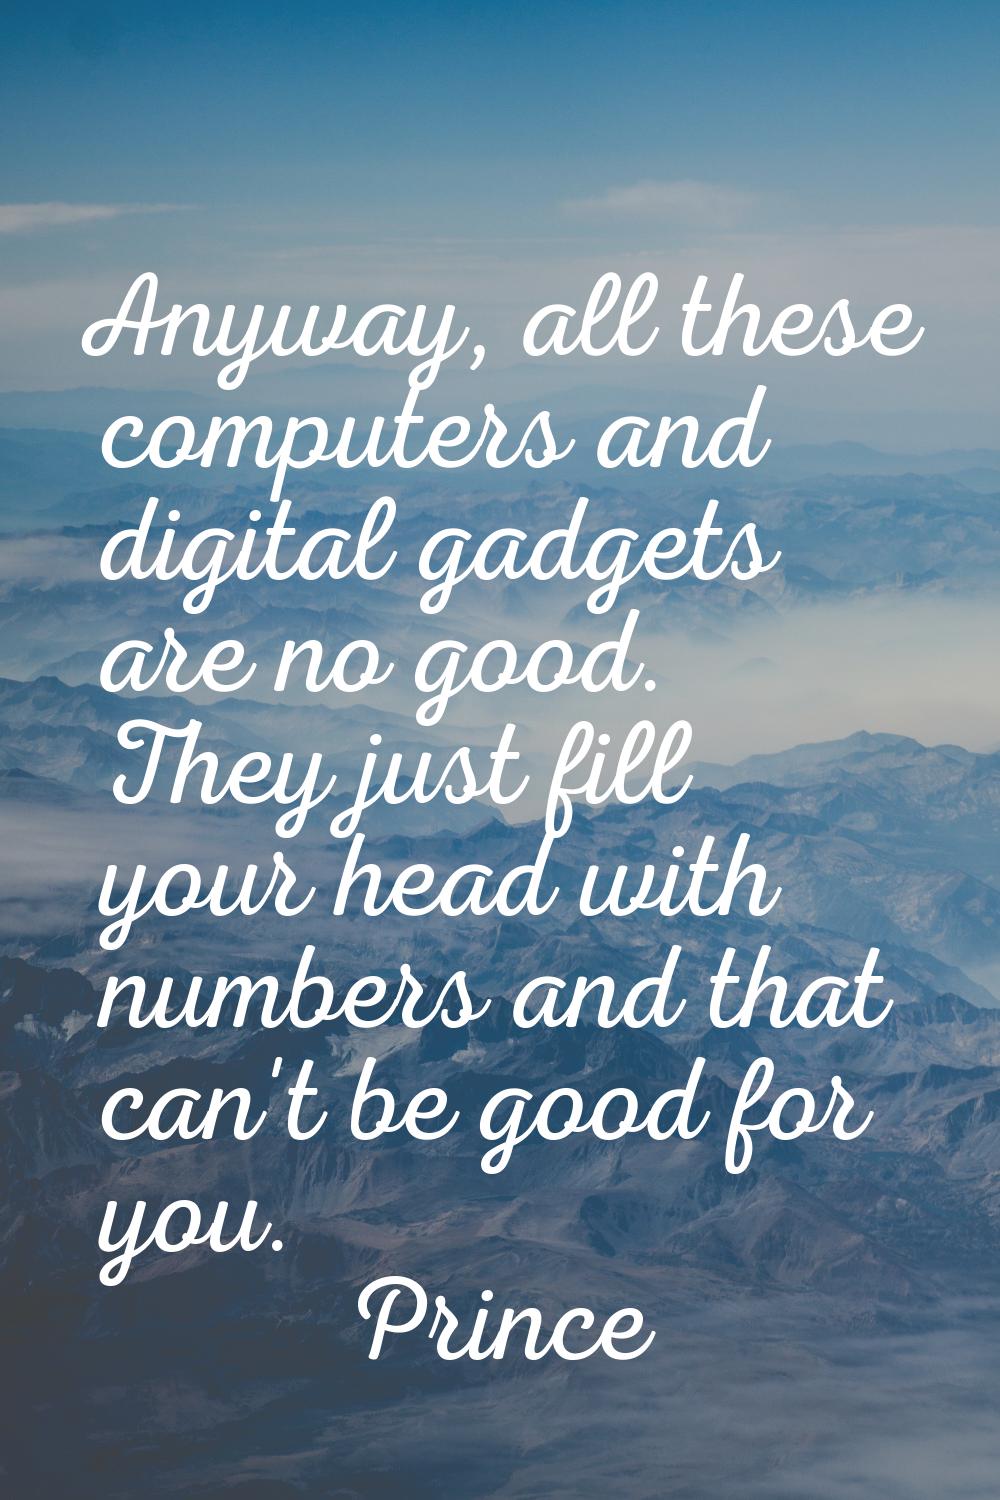 Anyway, all these computers and digital gadgets are no good. They just fill your head with numbers 